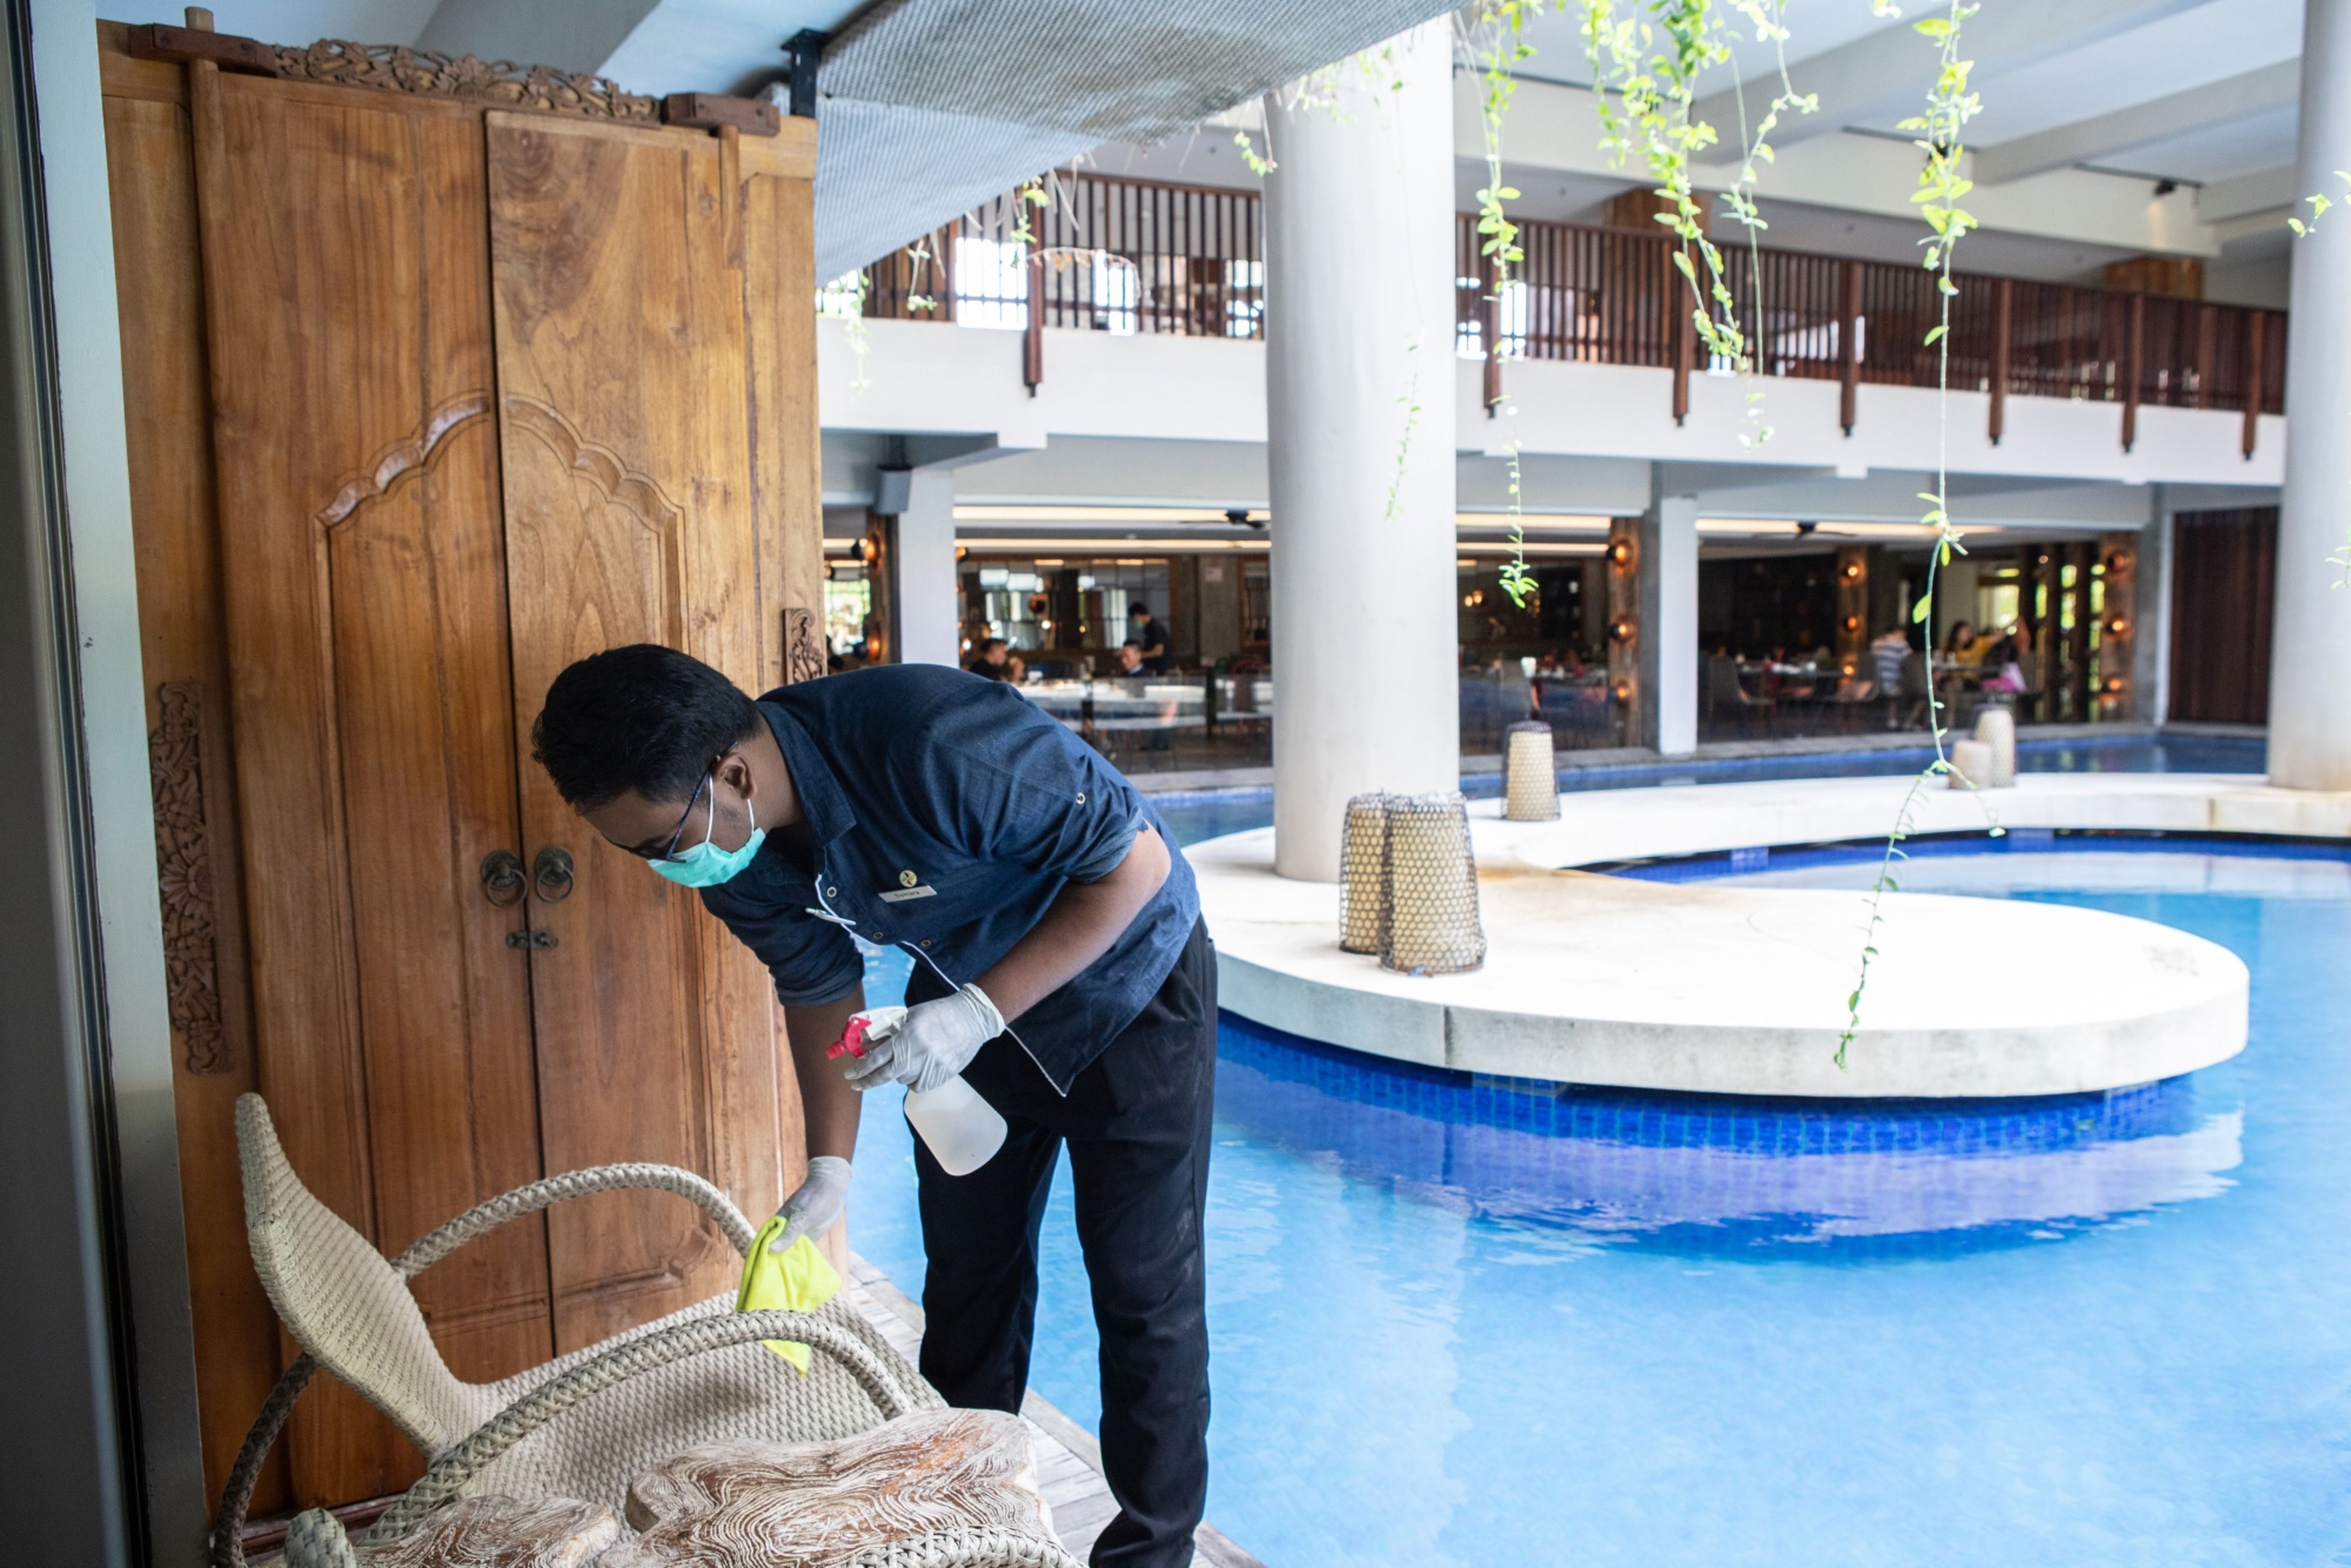 An employee wipes a chair by the swimming pool with disinfectant at Four Points By Sheraton Hotel in the Kuta area of Bali, Indonesia, on Friday, Oct. 29, 2021. (© 2021 Bloomberg Finance LP)